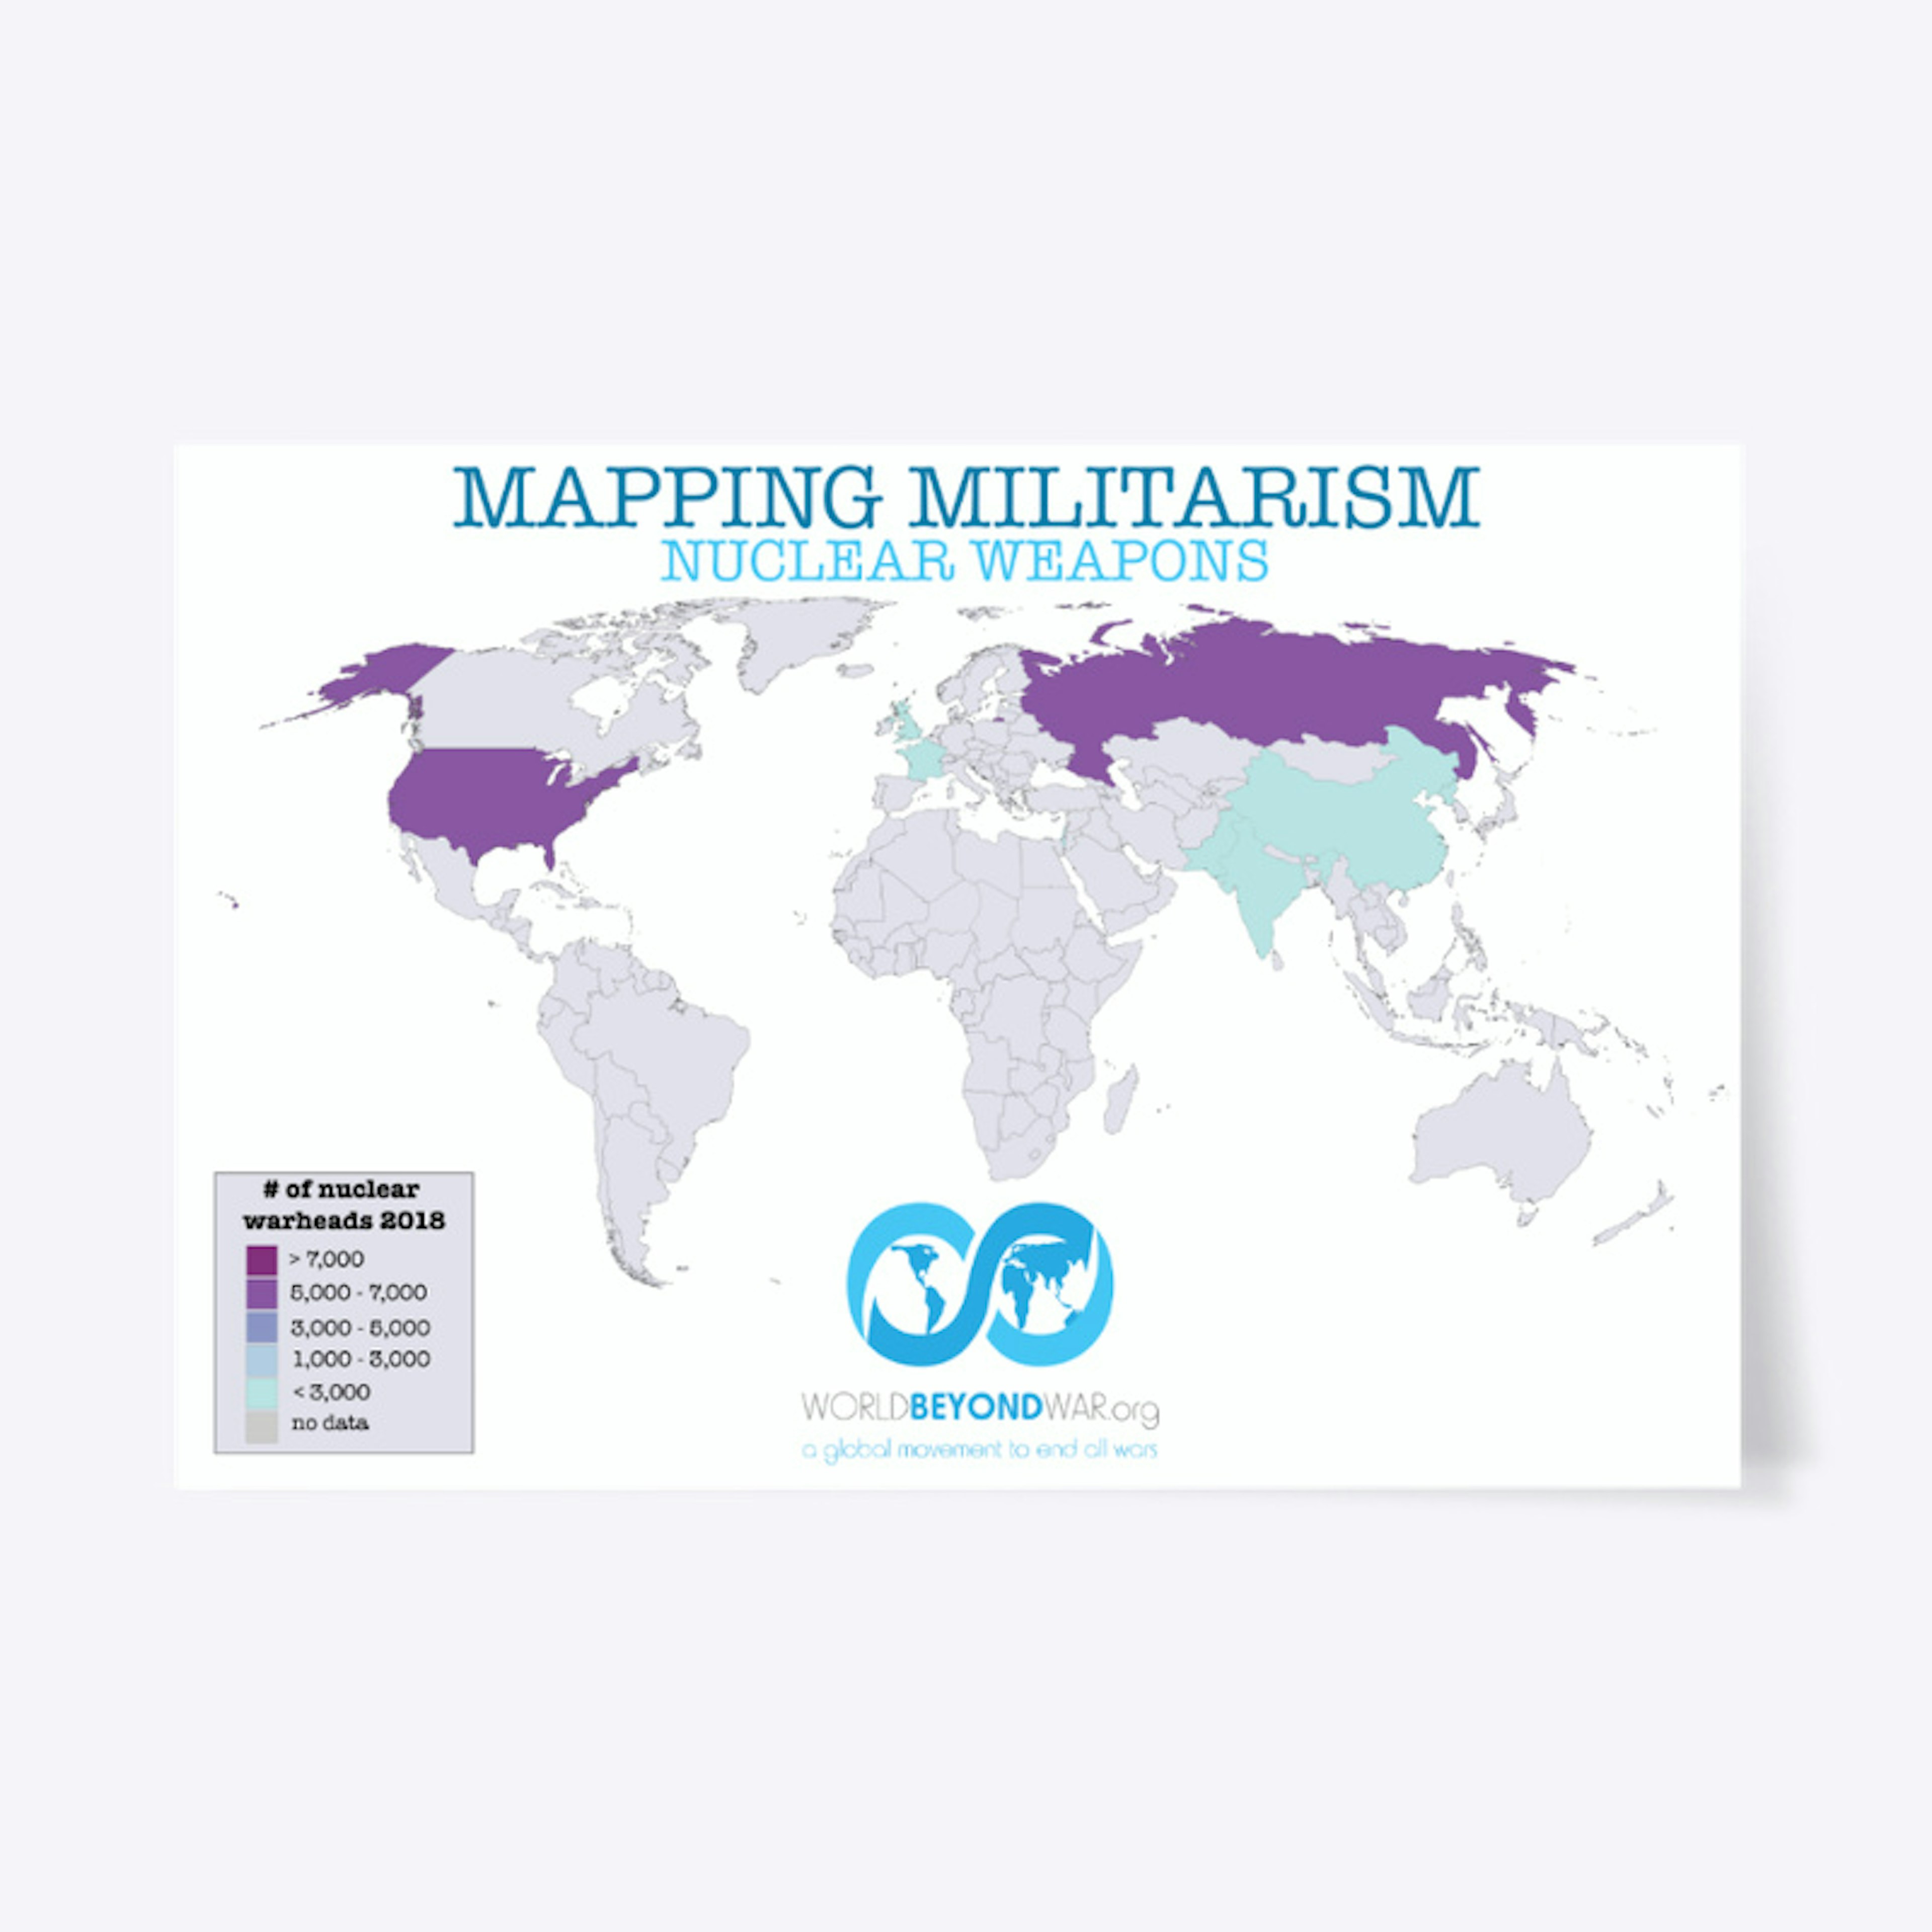 *Mapping Militarism: Nuclear Weapons